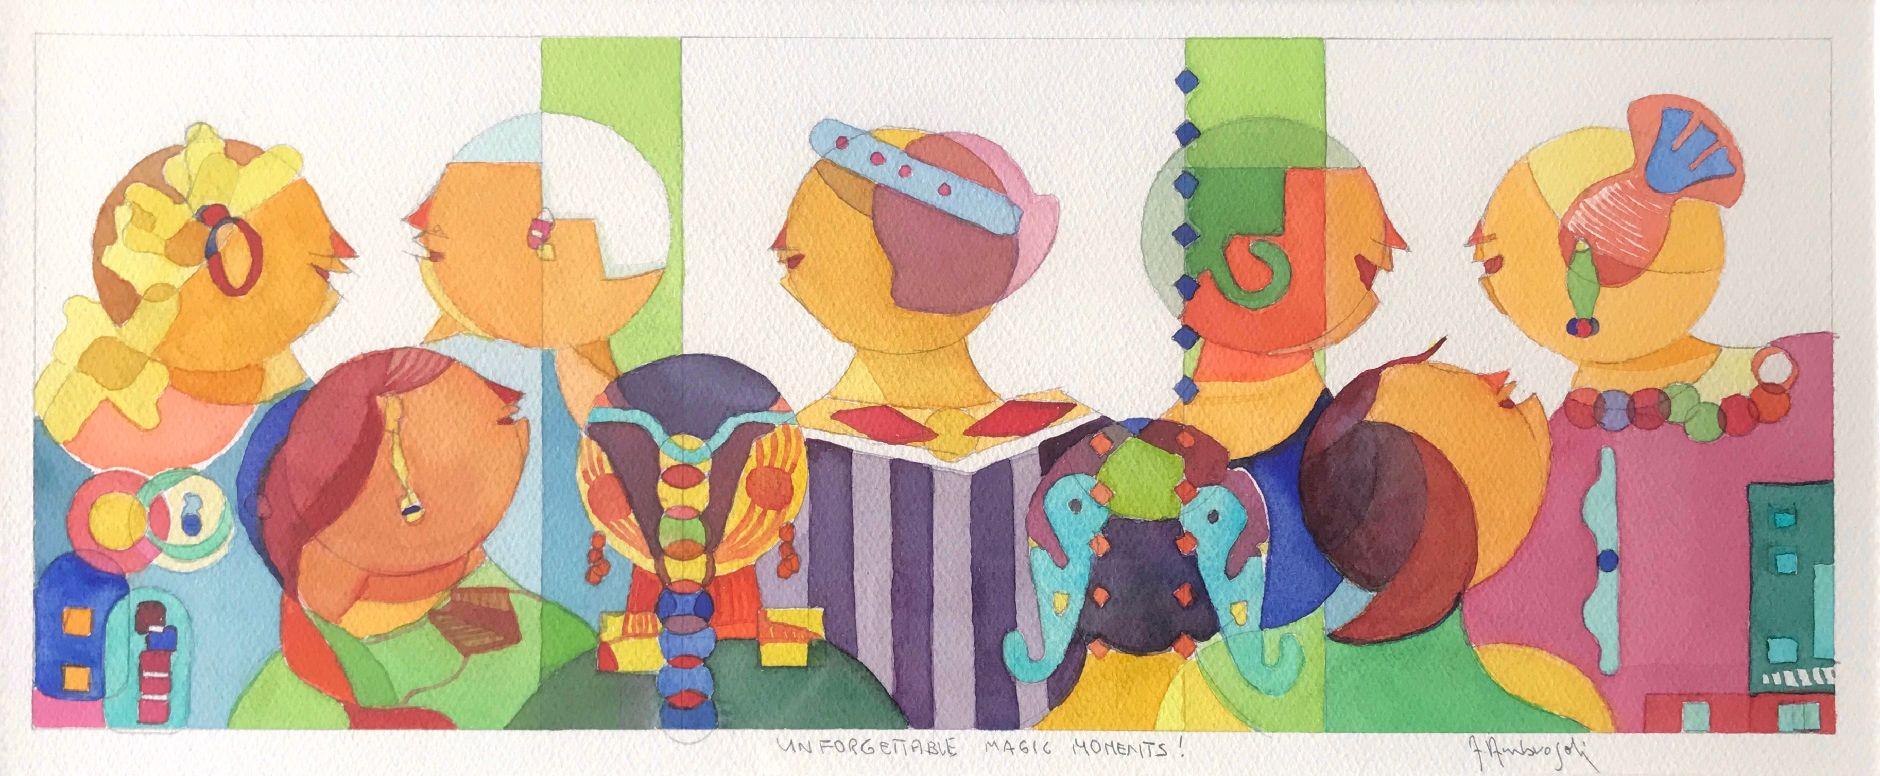 Unforgettable Magic Moments (2023), 19,5x45,5 cm, Watercolor on Paper Fabriano 600 g, by Italian contemporary artist ©Annemarie Ambrosoli (ICA, International Certified Artist)

Unforgettable Magic Moments is published in the book "Faces of Peace" by